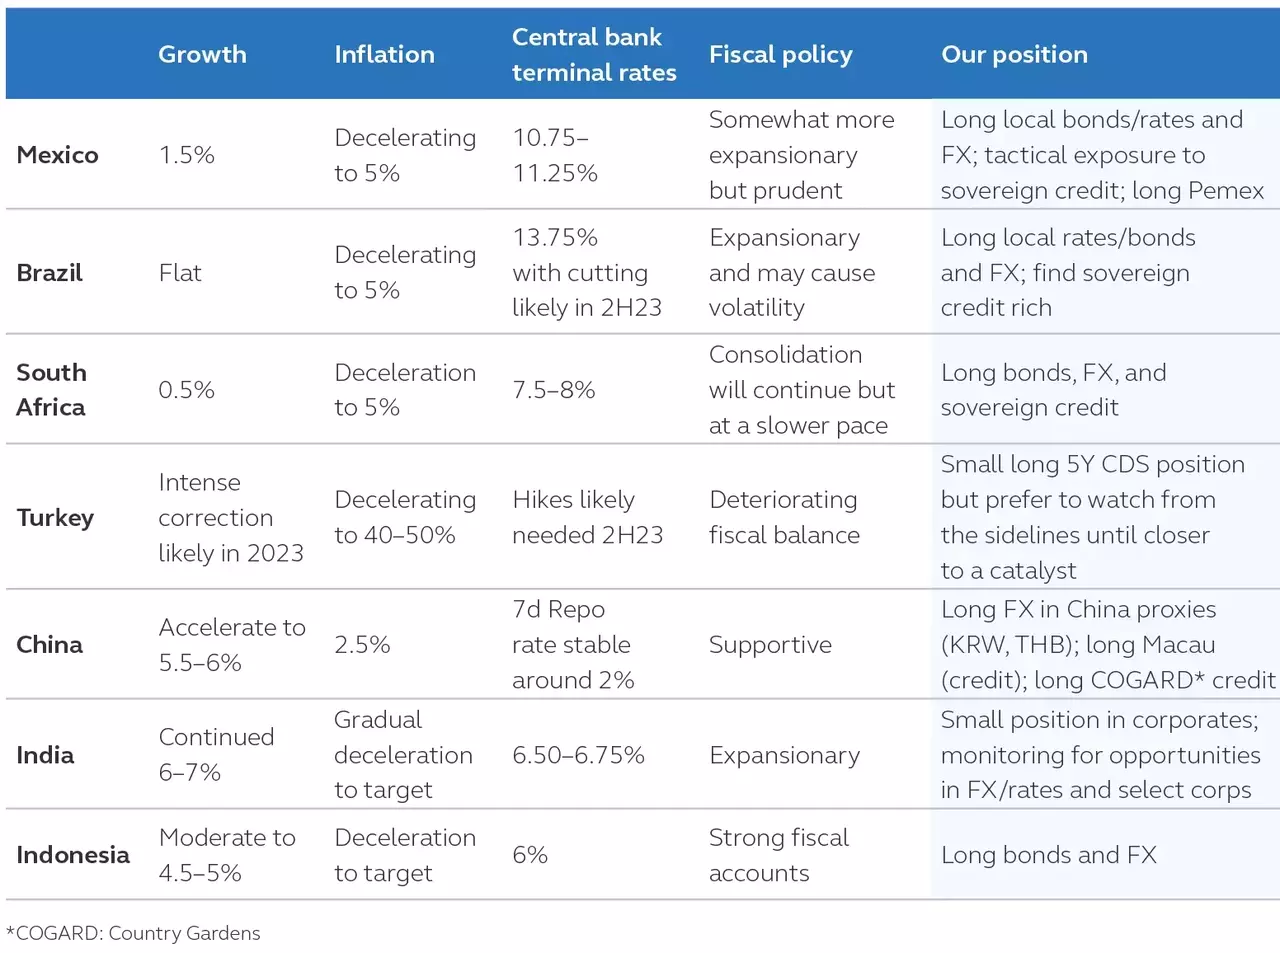 Table showing key country views in terms of growth, inflation, central bank terminal rates, fiscal policy, and the Principal position.